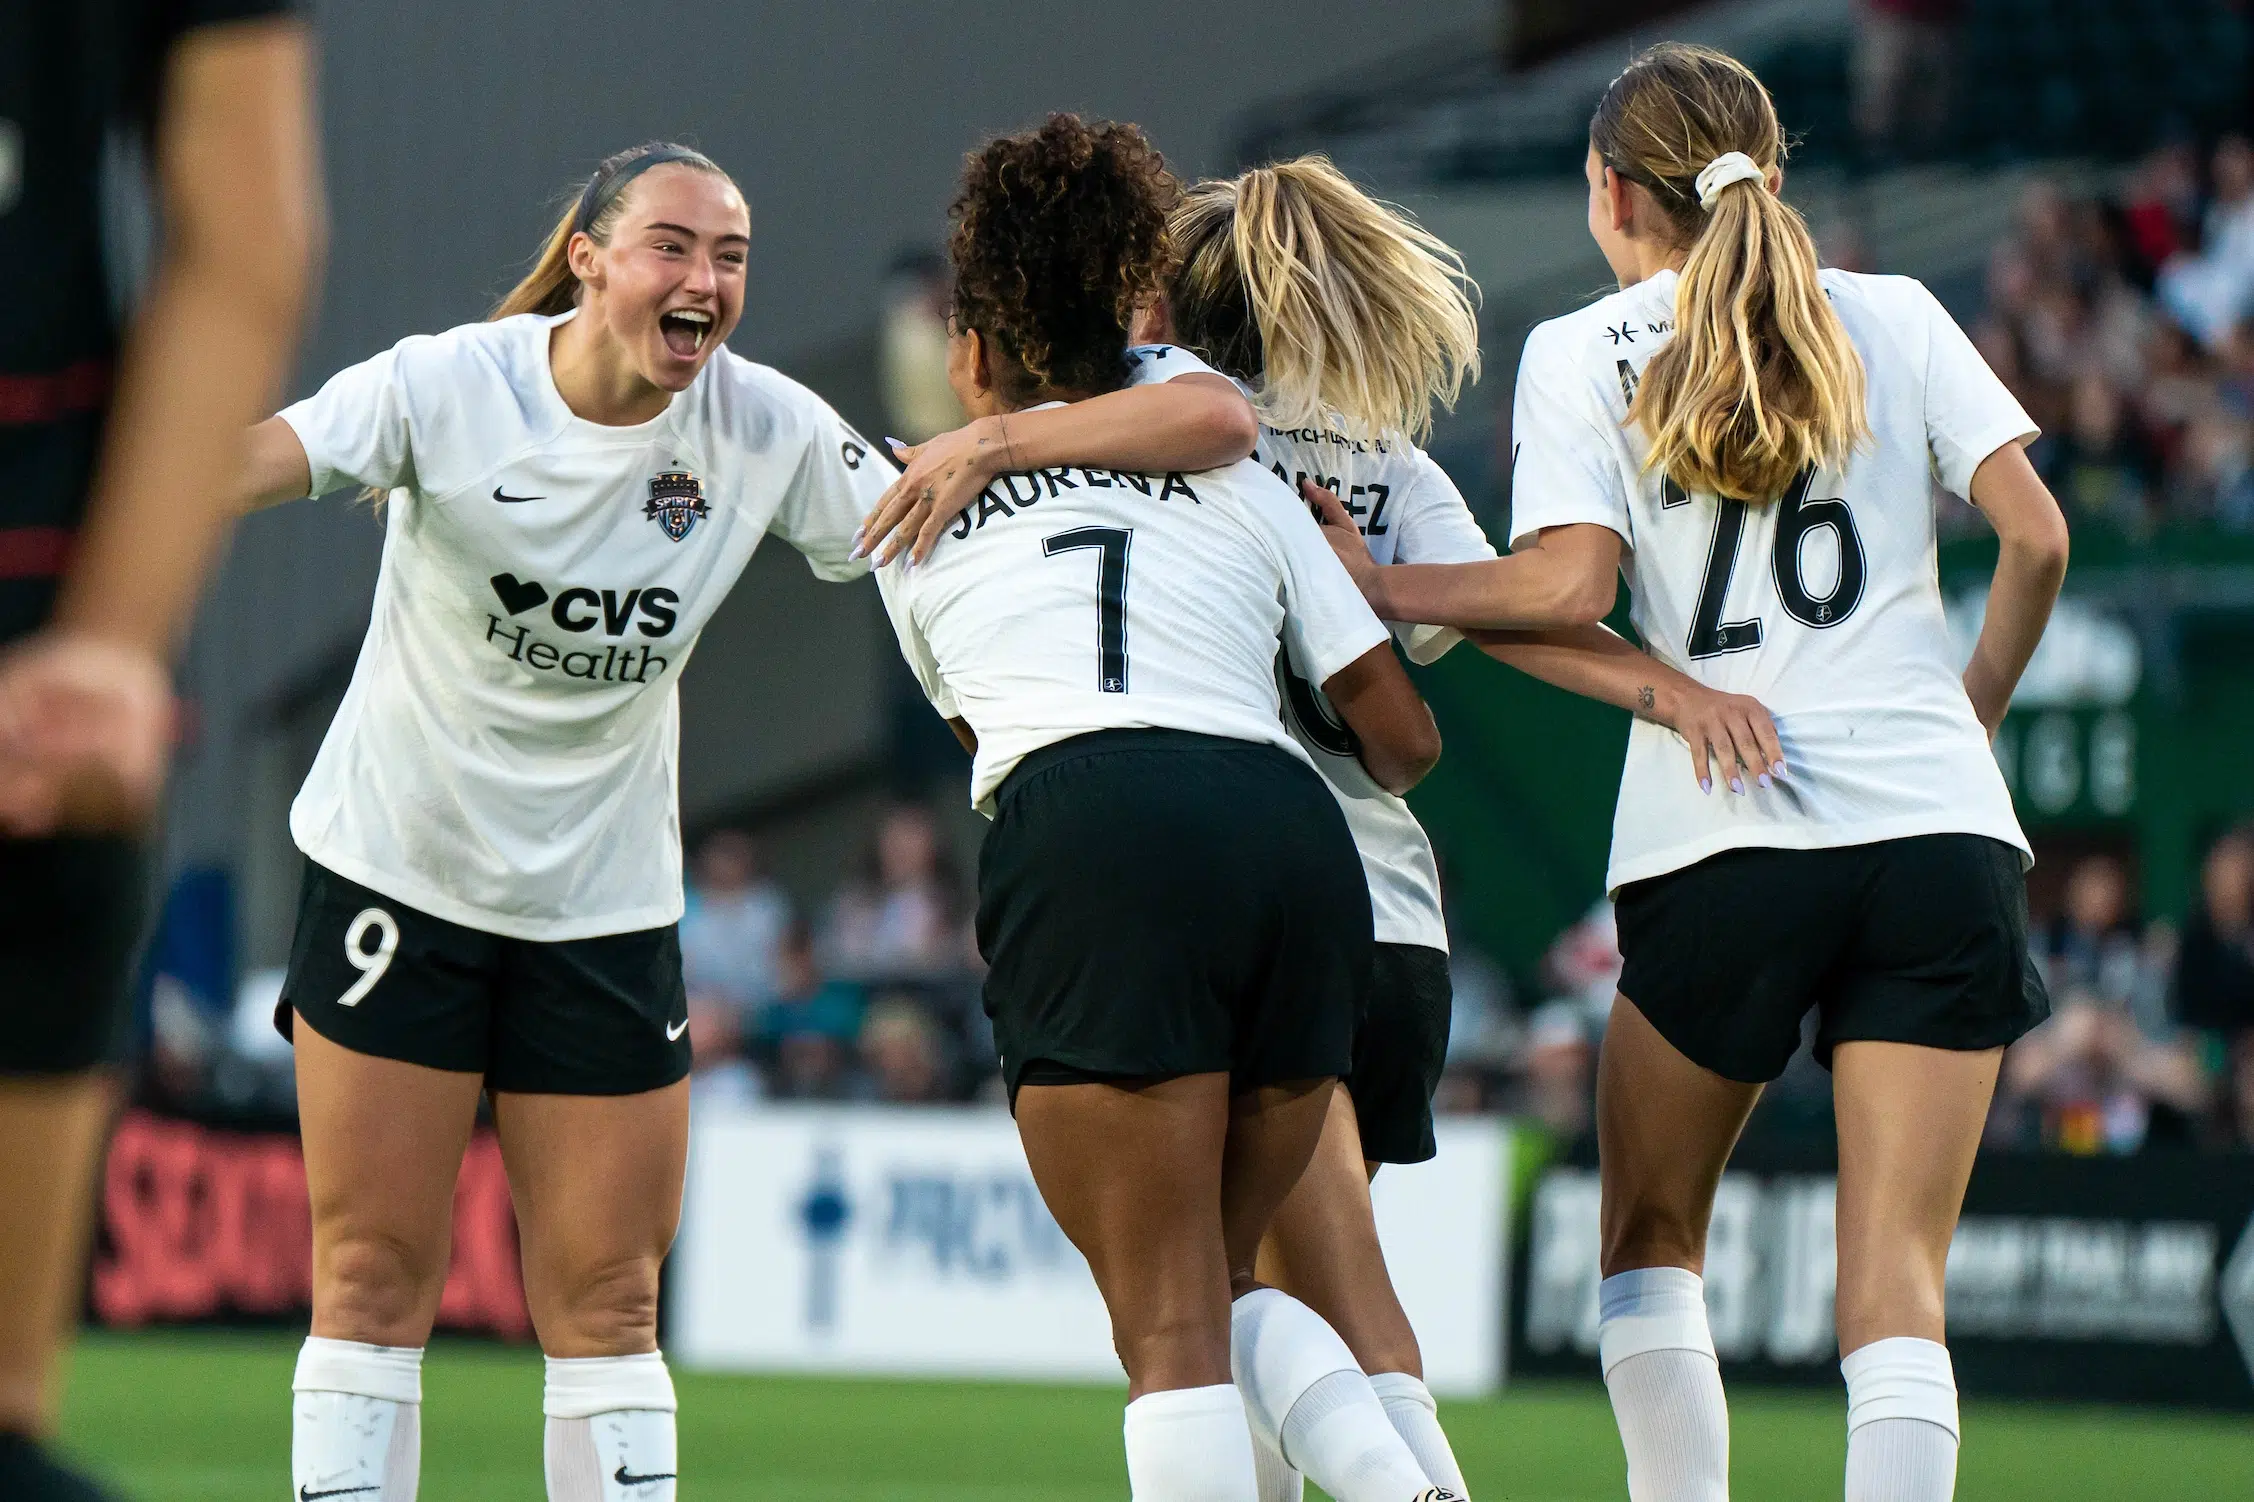 Four players in white jerseys, black shorts and white socks embrace and cheer after scoring a goal.